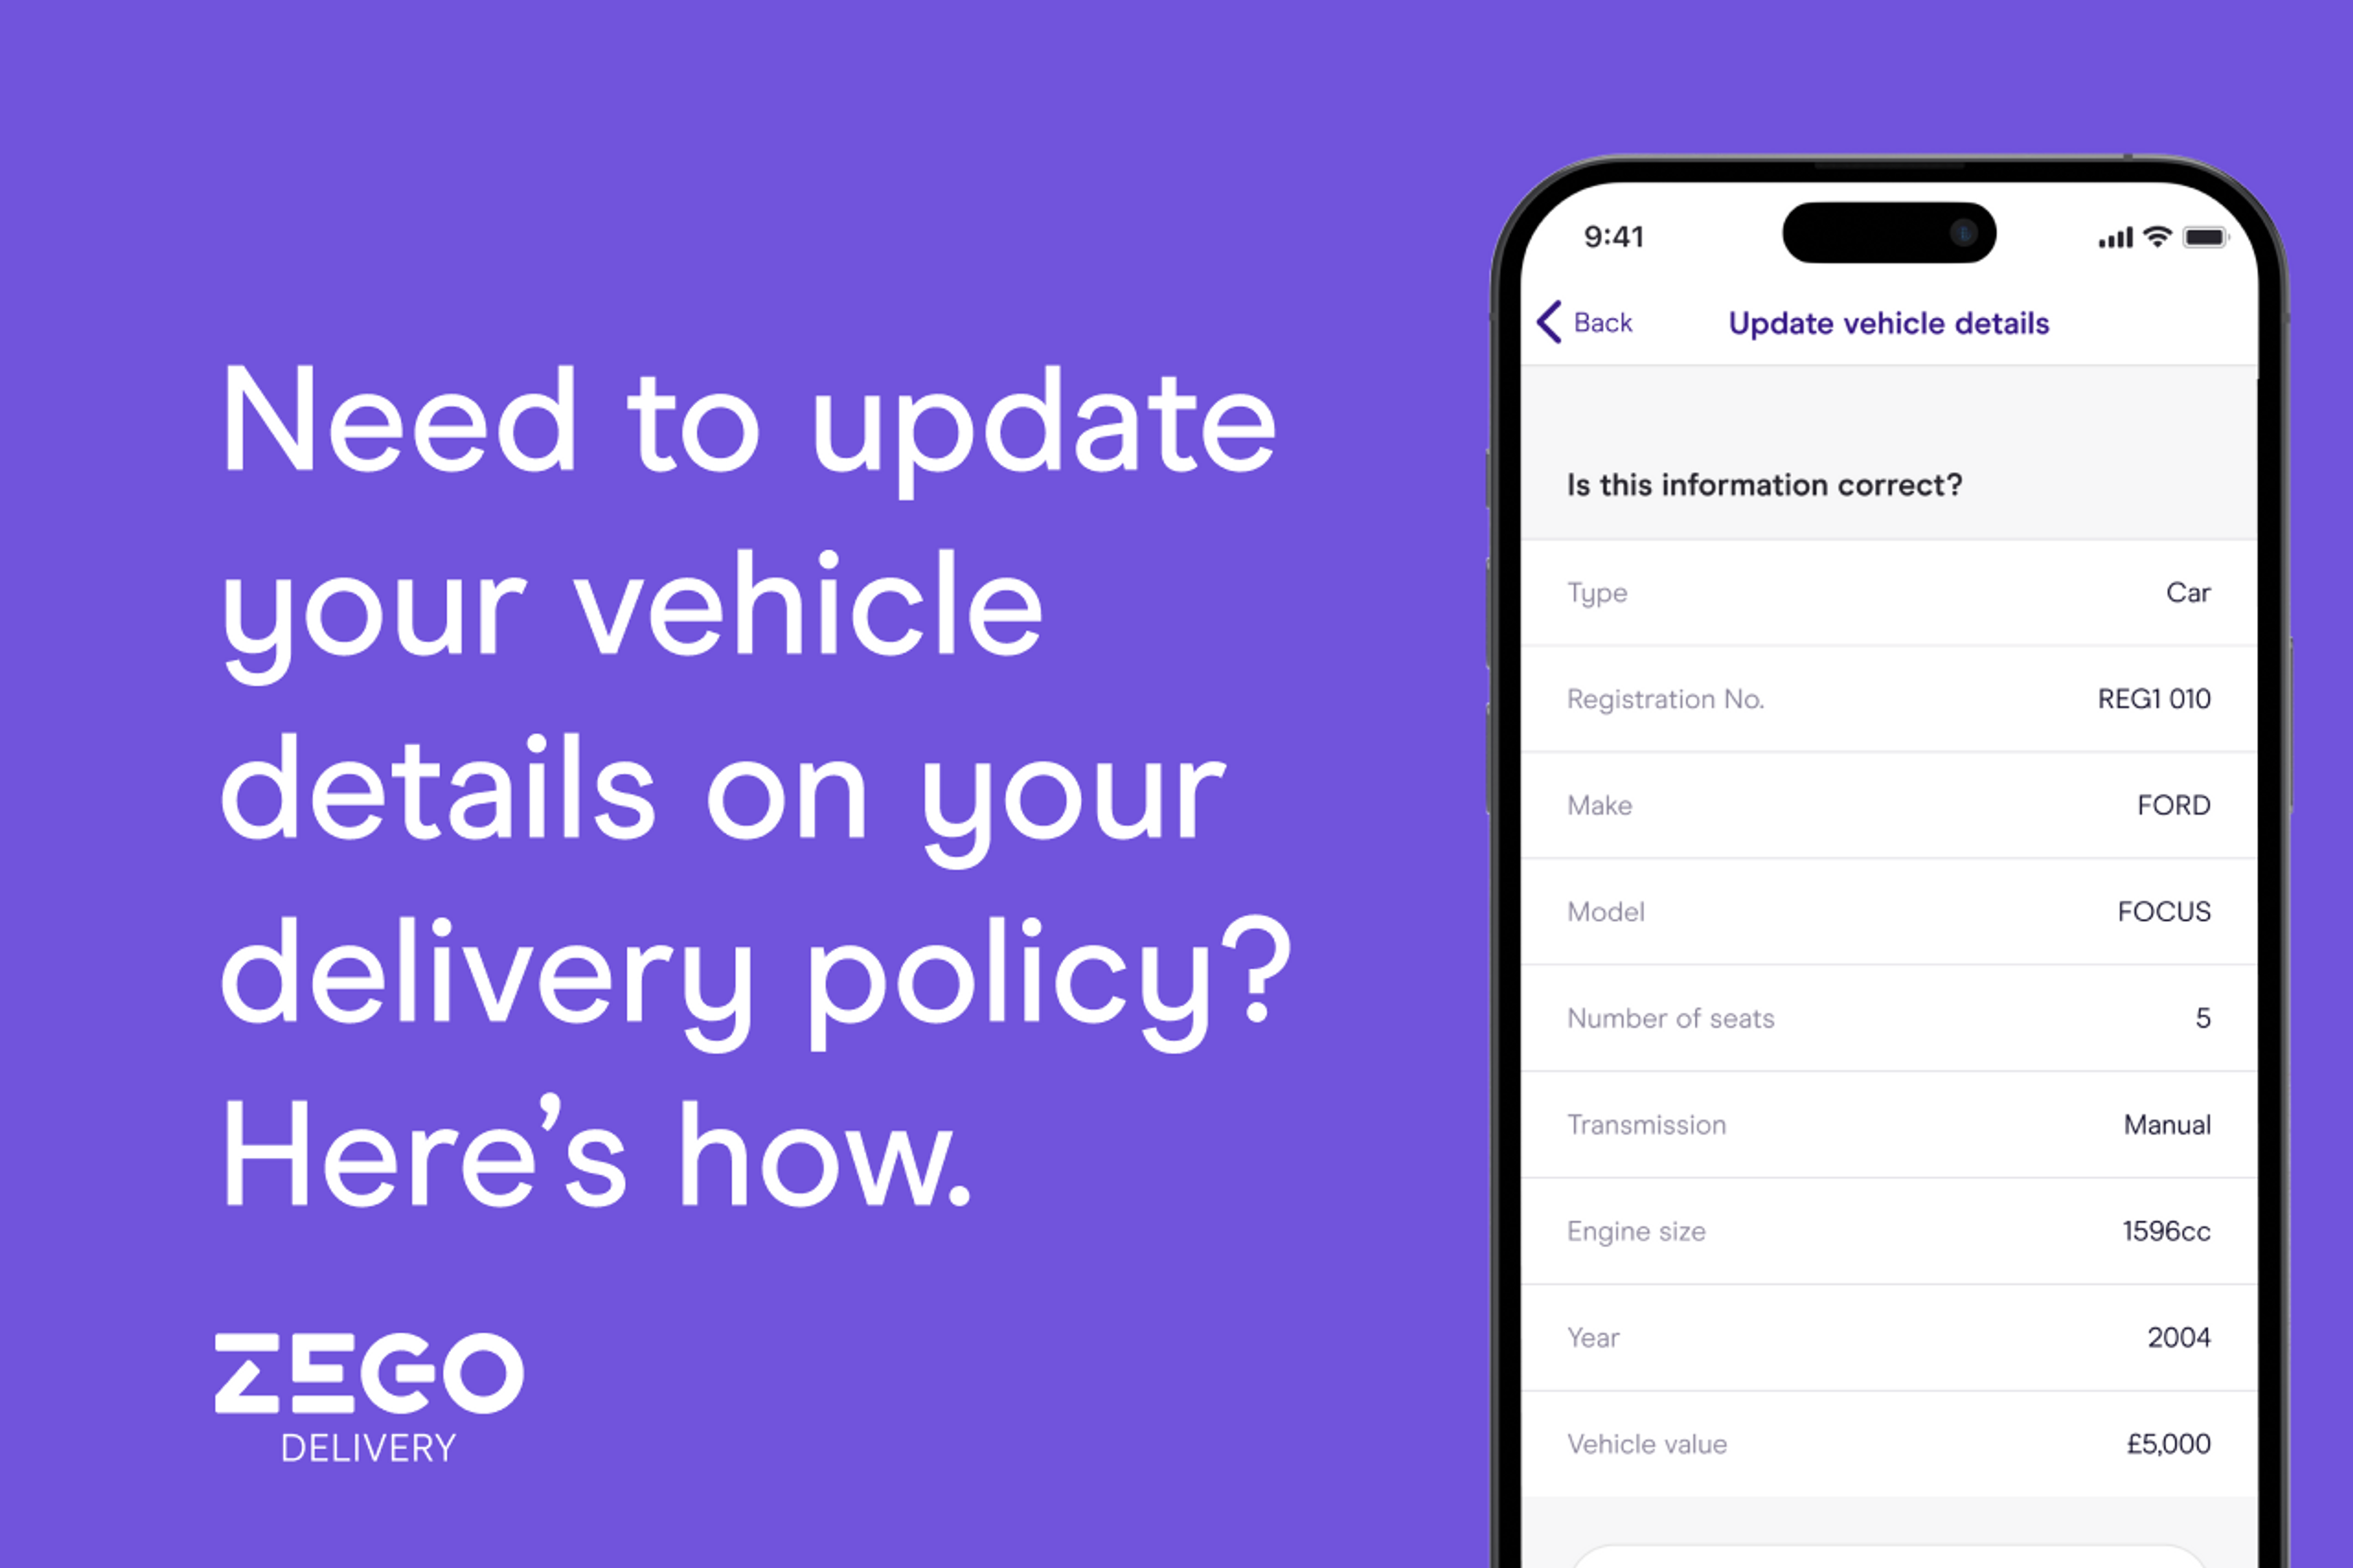 Need to update your vehicle details on your delivery policy? Here’s how.